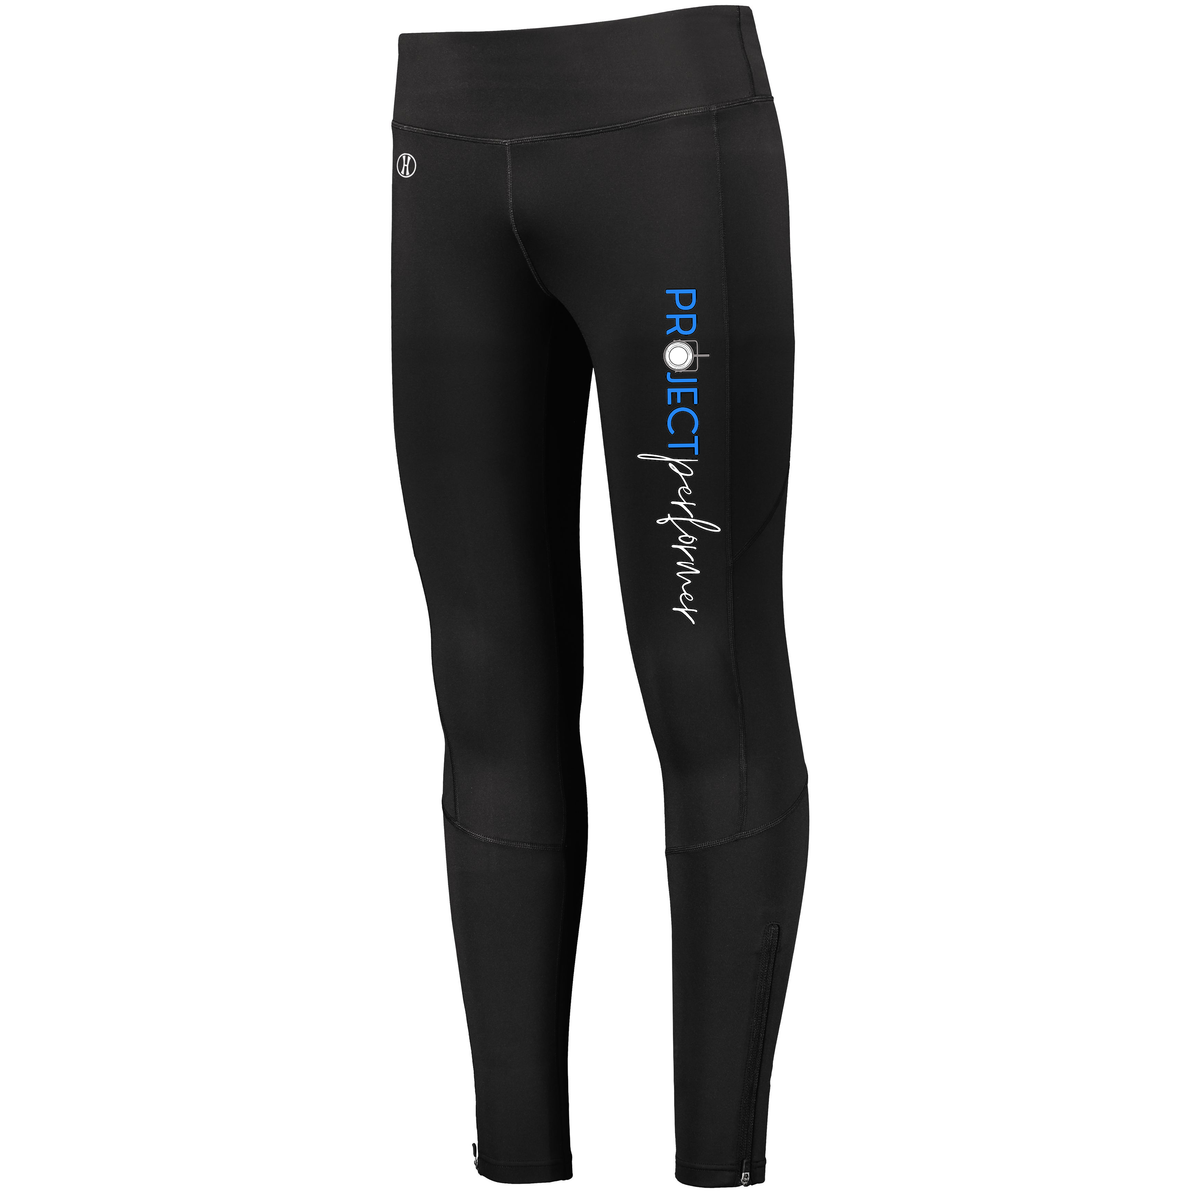 Project Performer Ladies High Rise Tech Tight